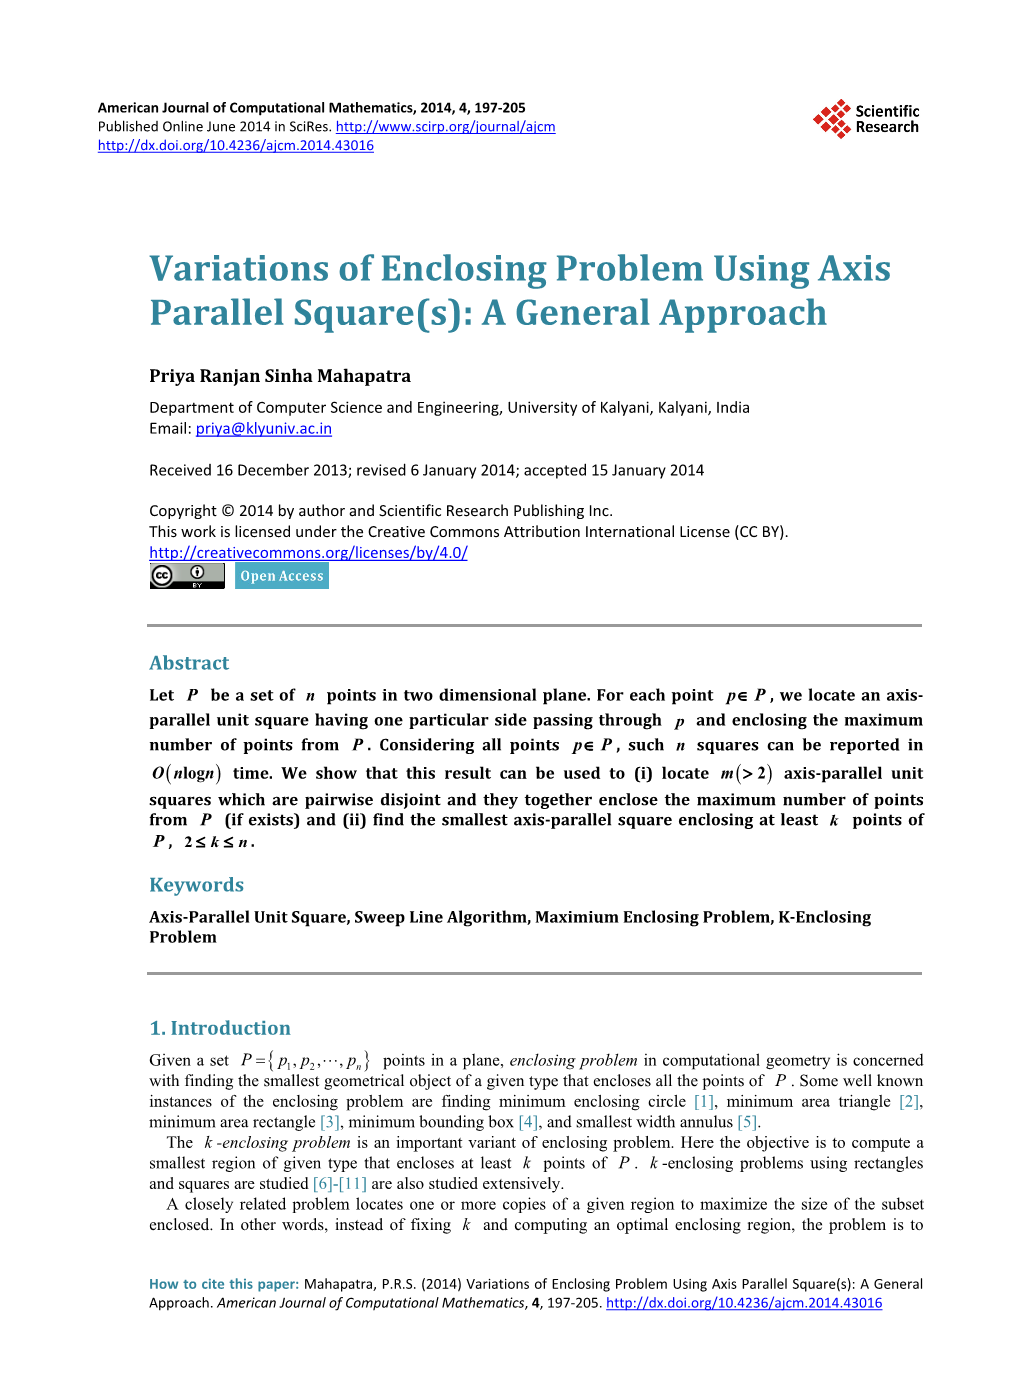 Variations of Enclosing Problem Using Axis Parallel Square(S): a General Approach